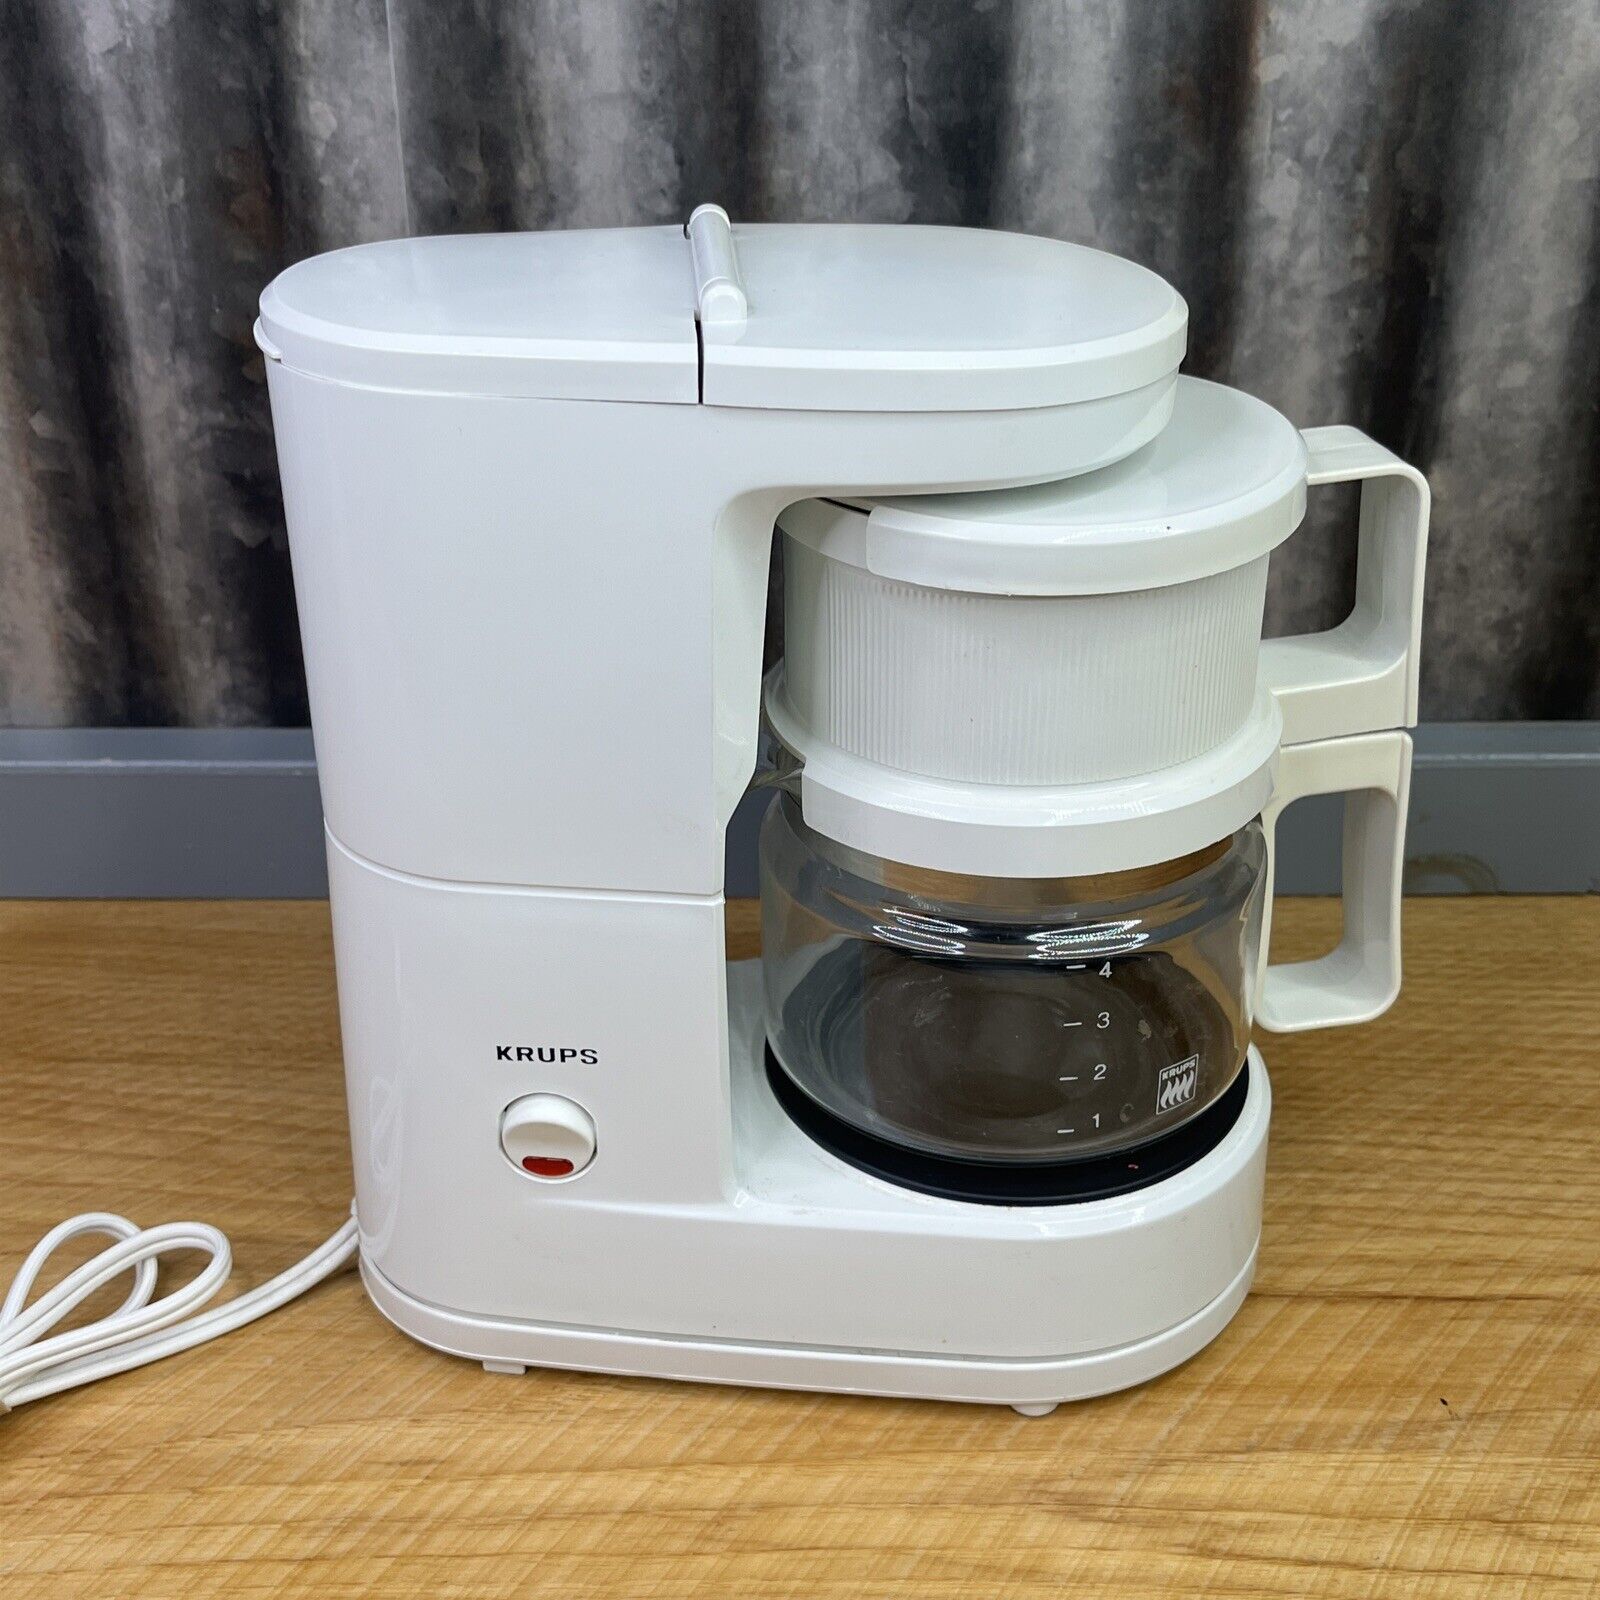 Krups White Brewmaster Jr Coffee Maker Type 170 Electric Automatic 4 Cup Tested